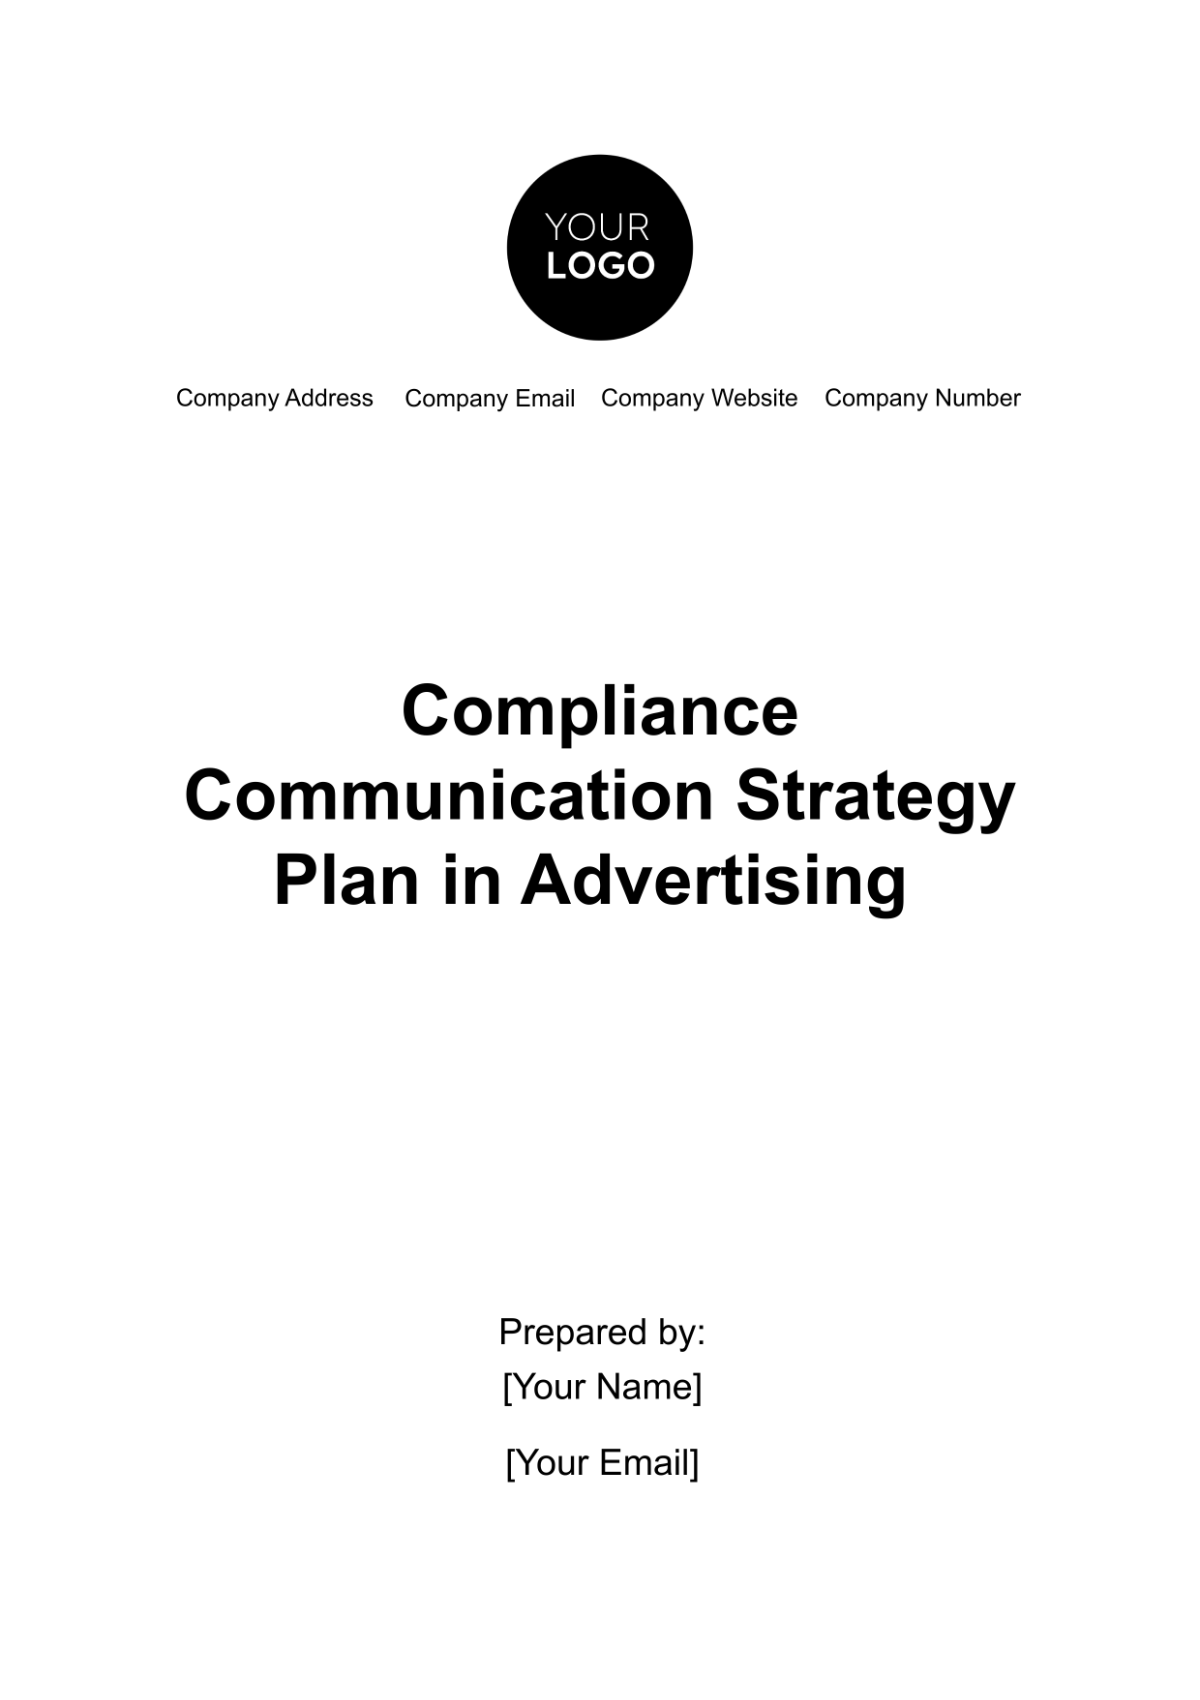 Compliance Communication Strategy Plan in Advertising Template